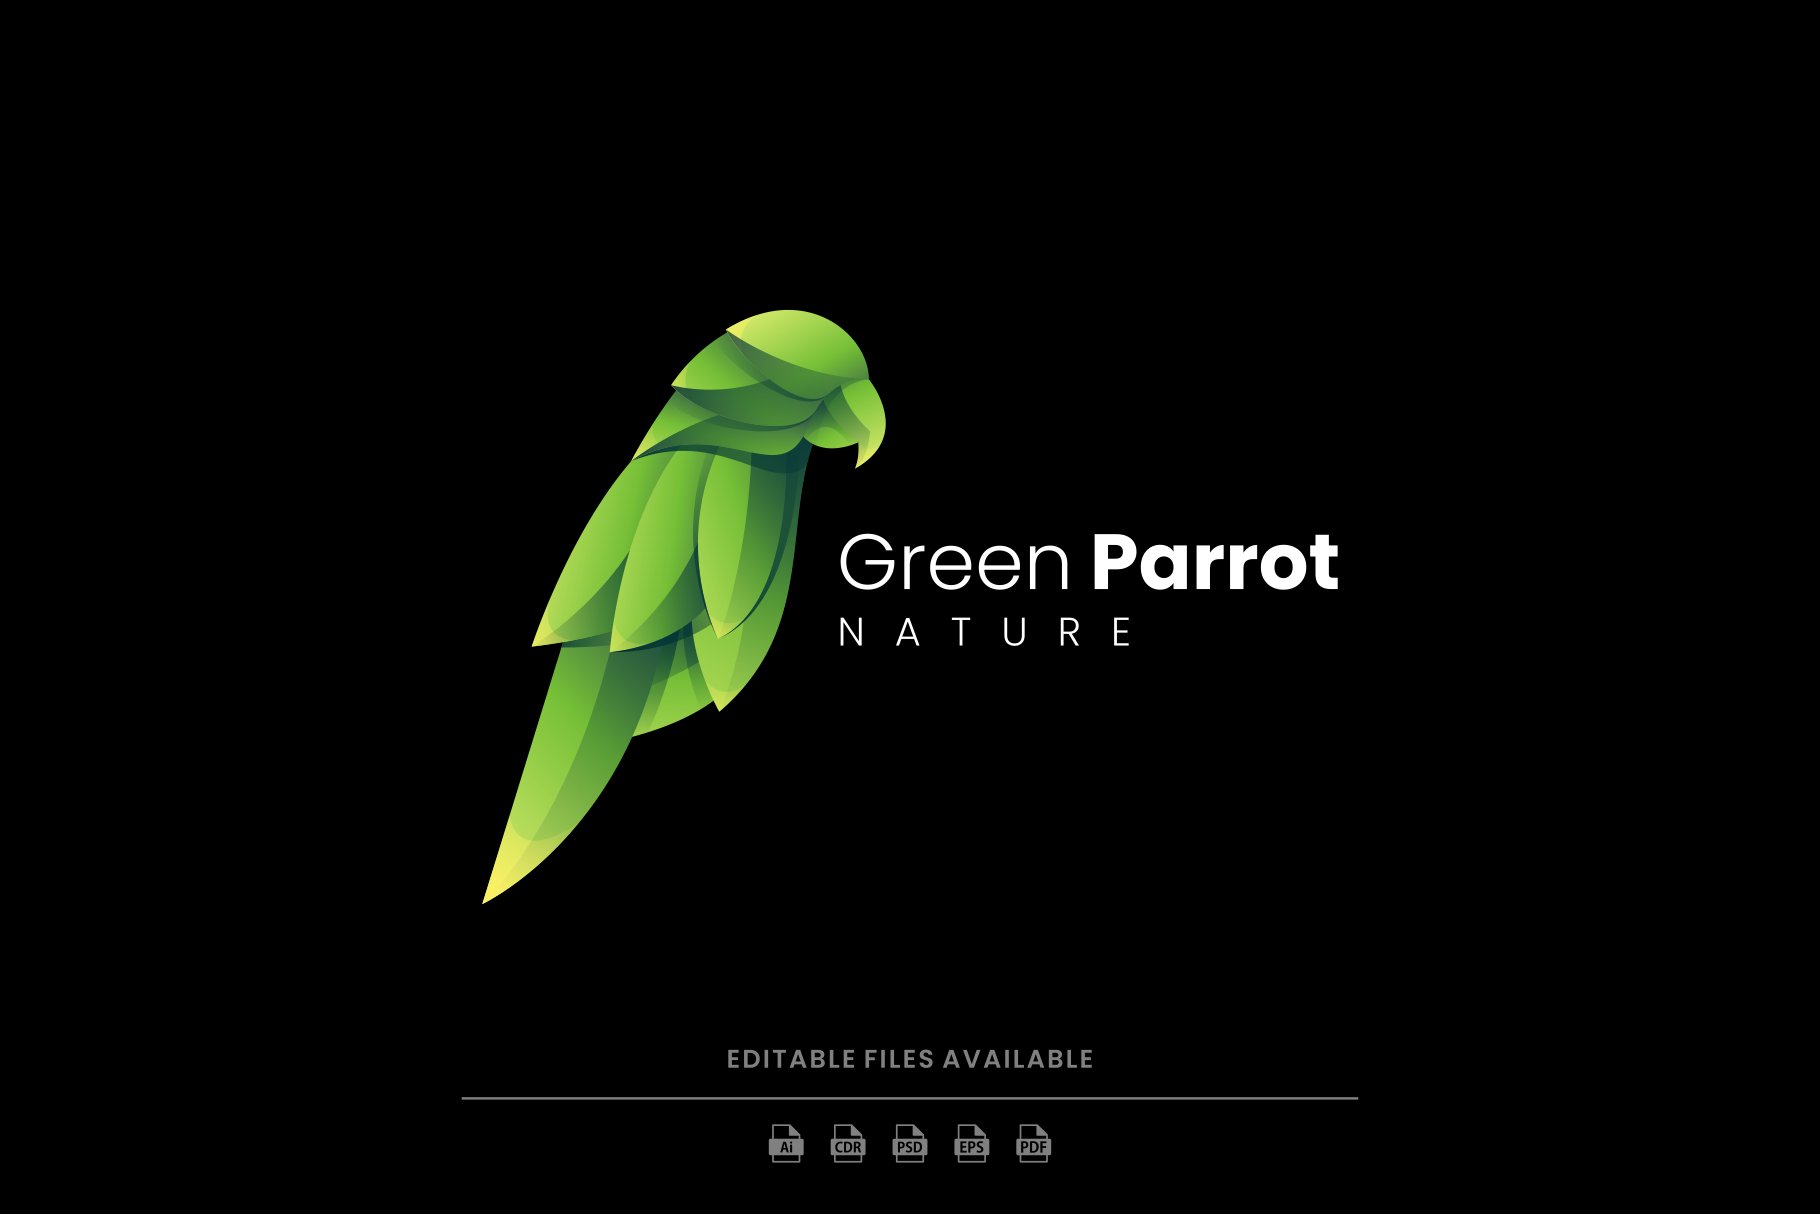 Green Parrot Gradient Logo cover image.